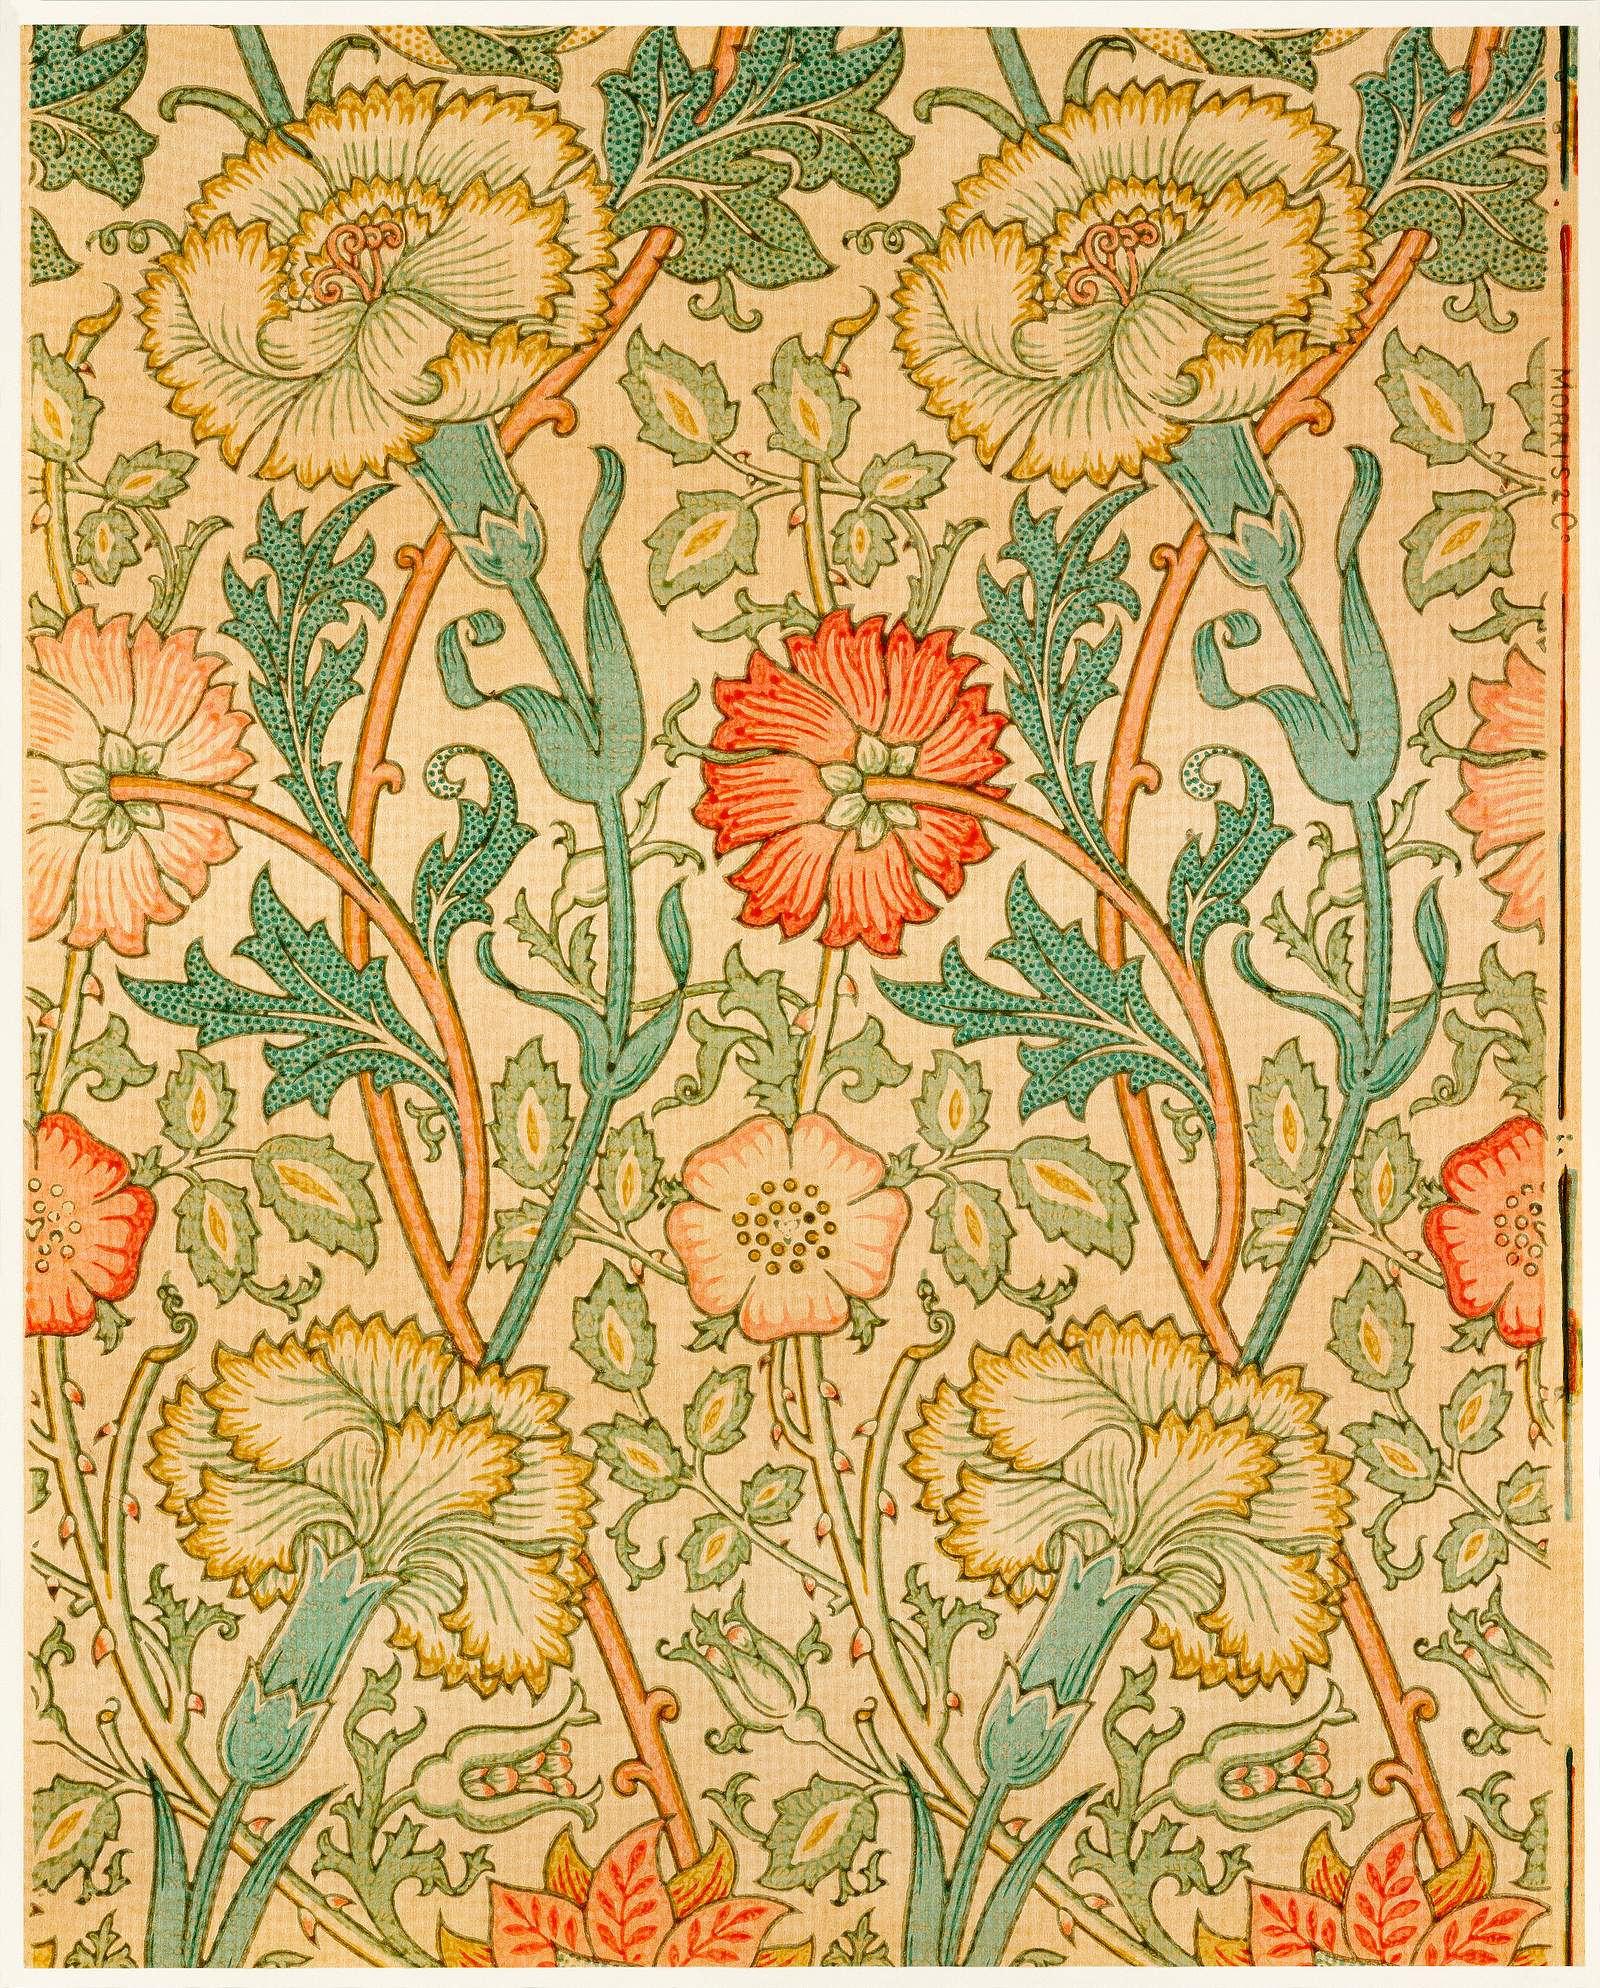 Pink and Rose by William Morris (1834-1896). Original from The MET Mus.. | Free public domain